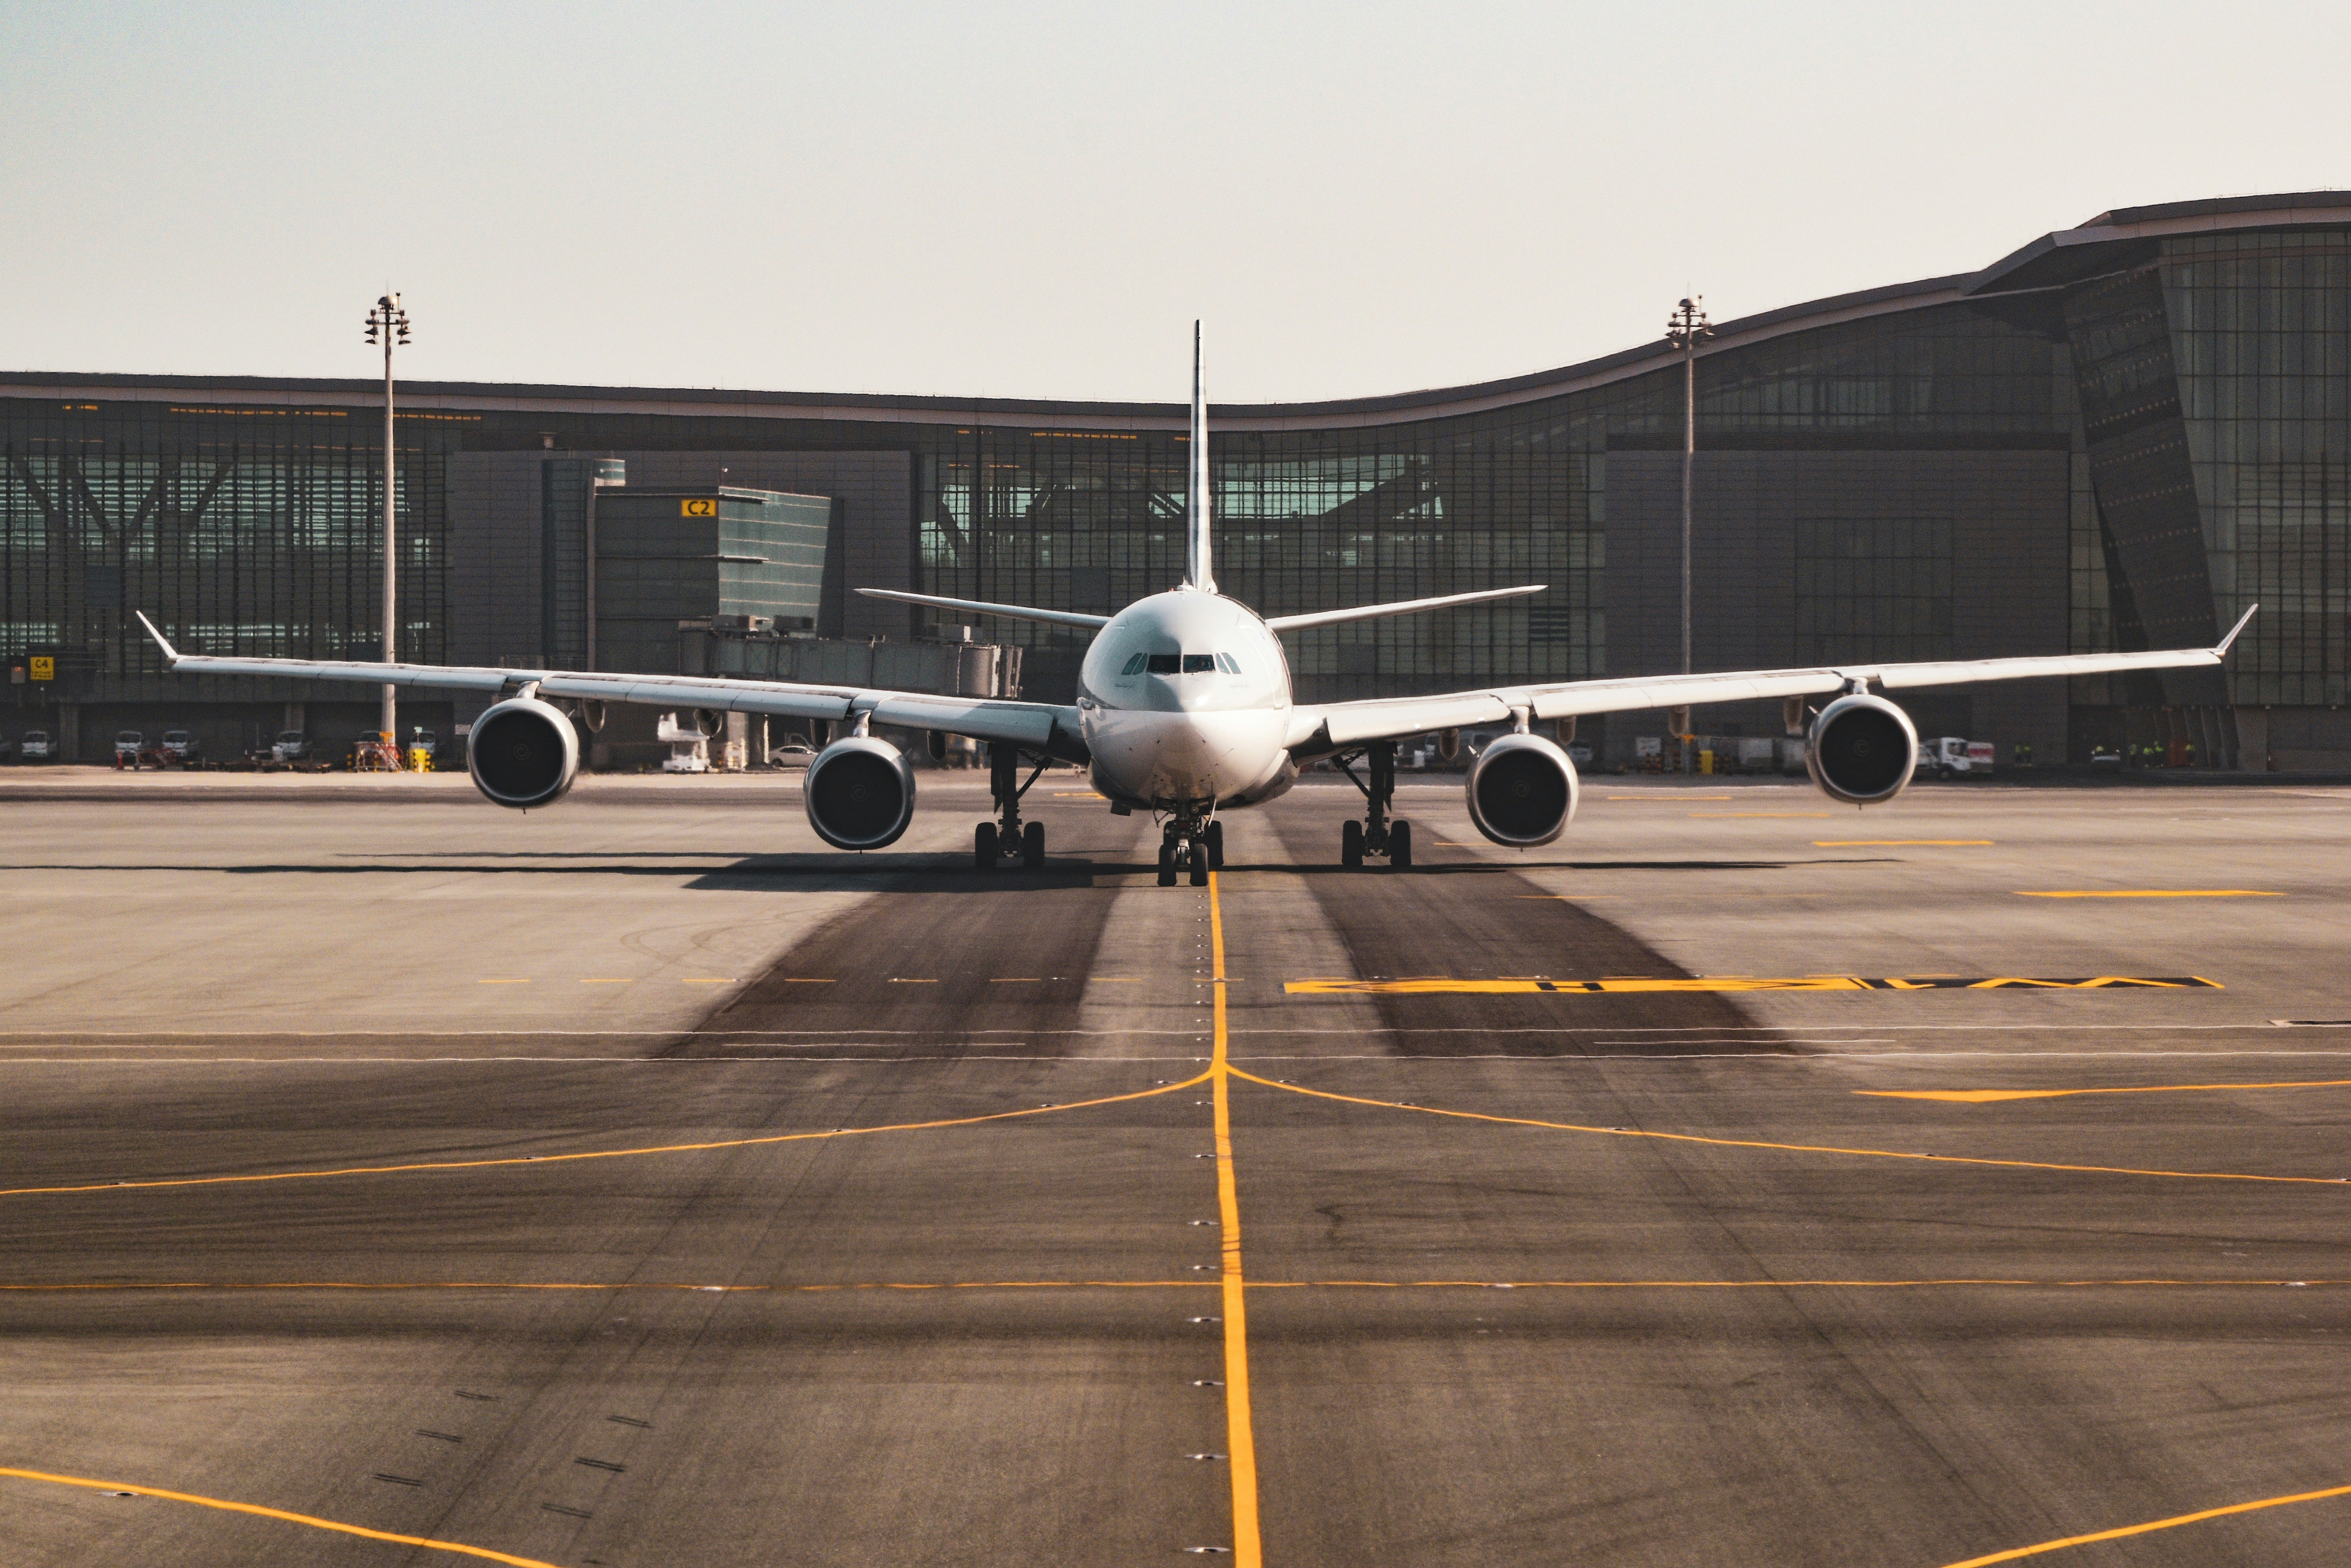 Airports cannot afford power outages. The implications of even a brief power disruption can be far-reaching, affecting flight schedules, security systems, baggage processes and other passenger services.